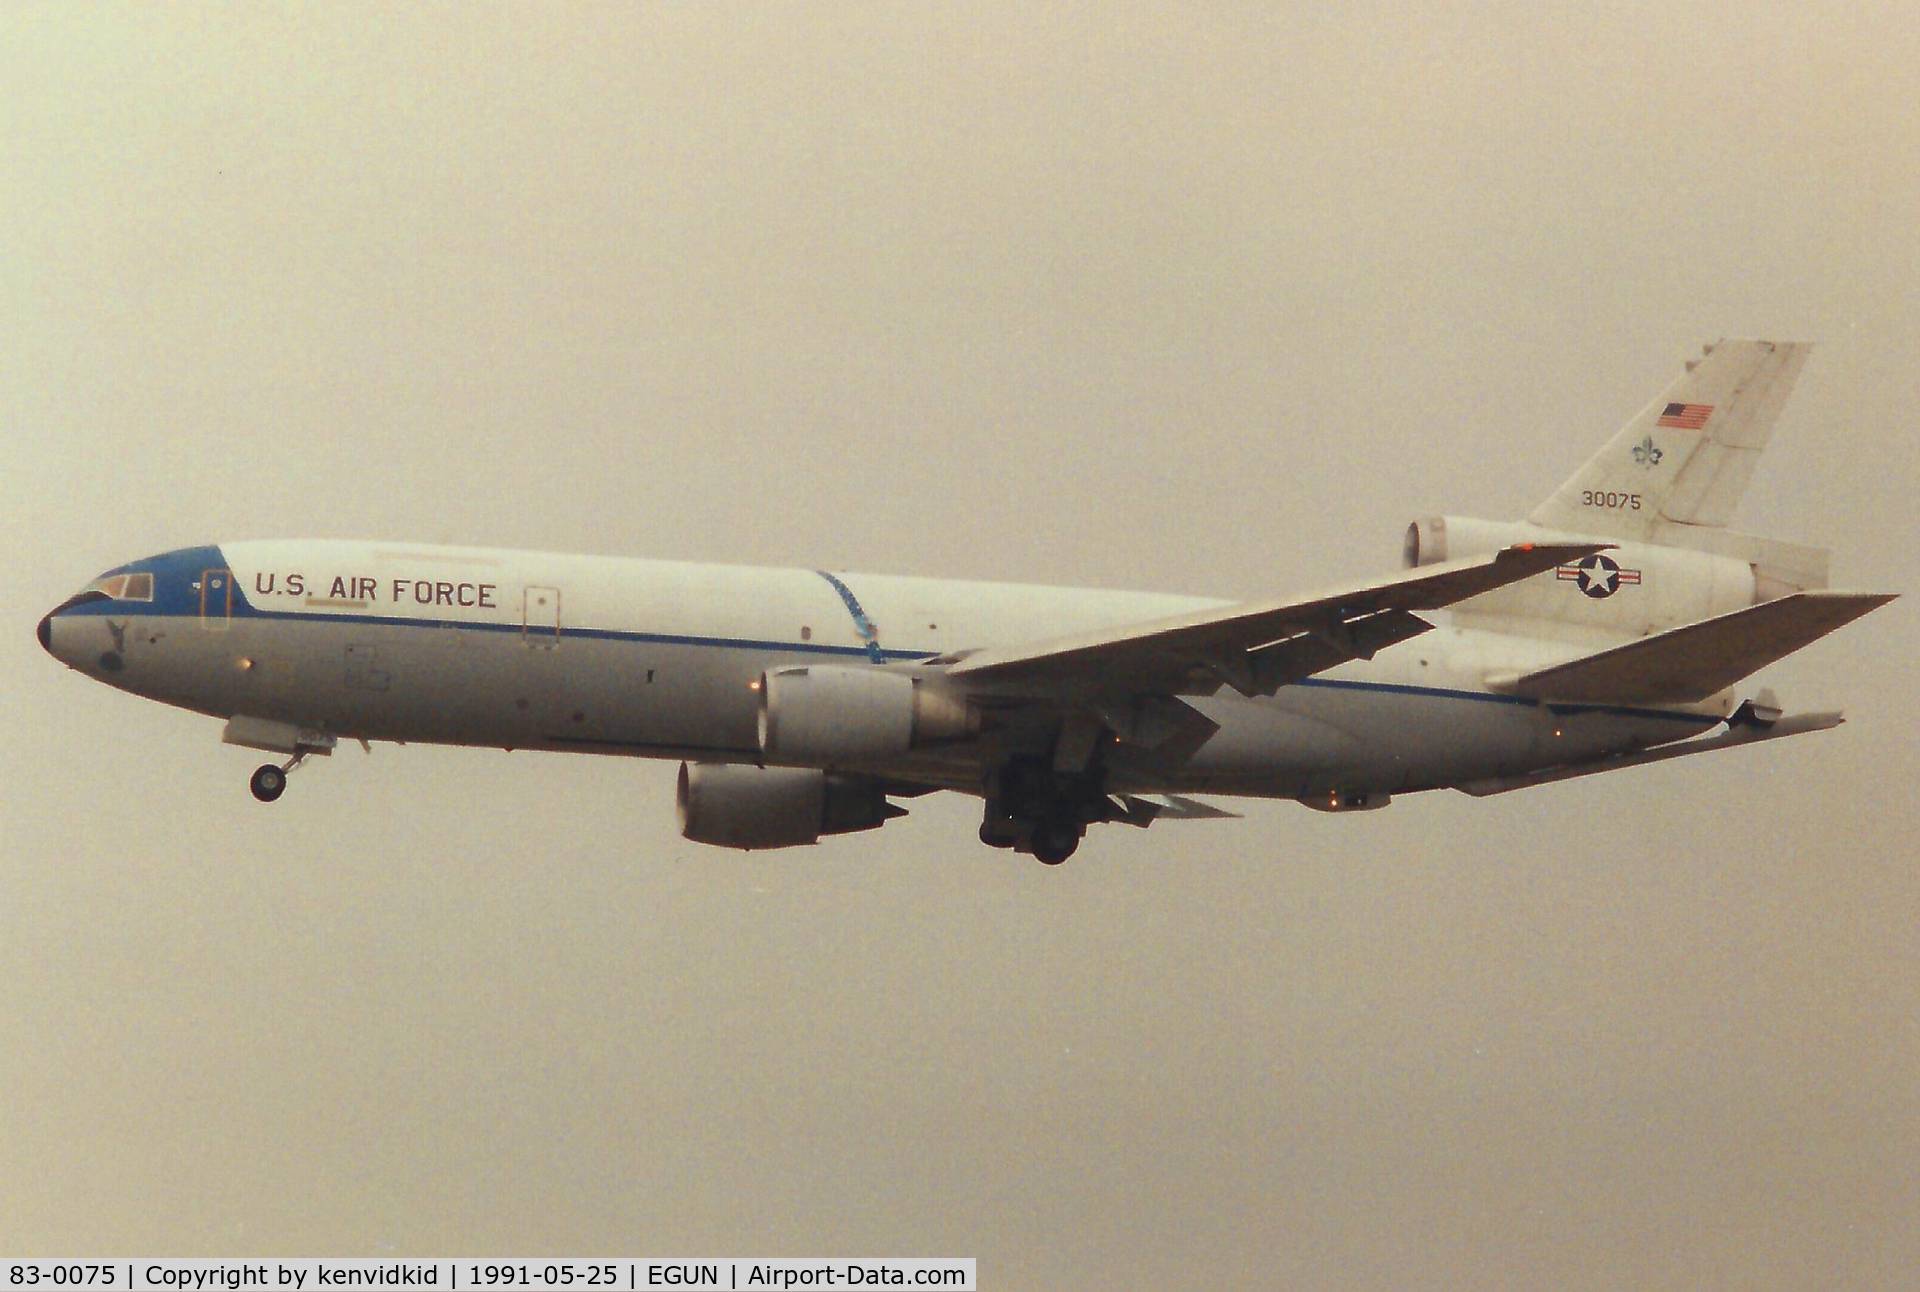 83-0075, 1983 McDonnell Douglas KC-10A Extender C/N 48216, At the 1991 Mildenhall Air Fete. Scanned from print.